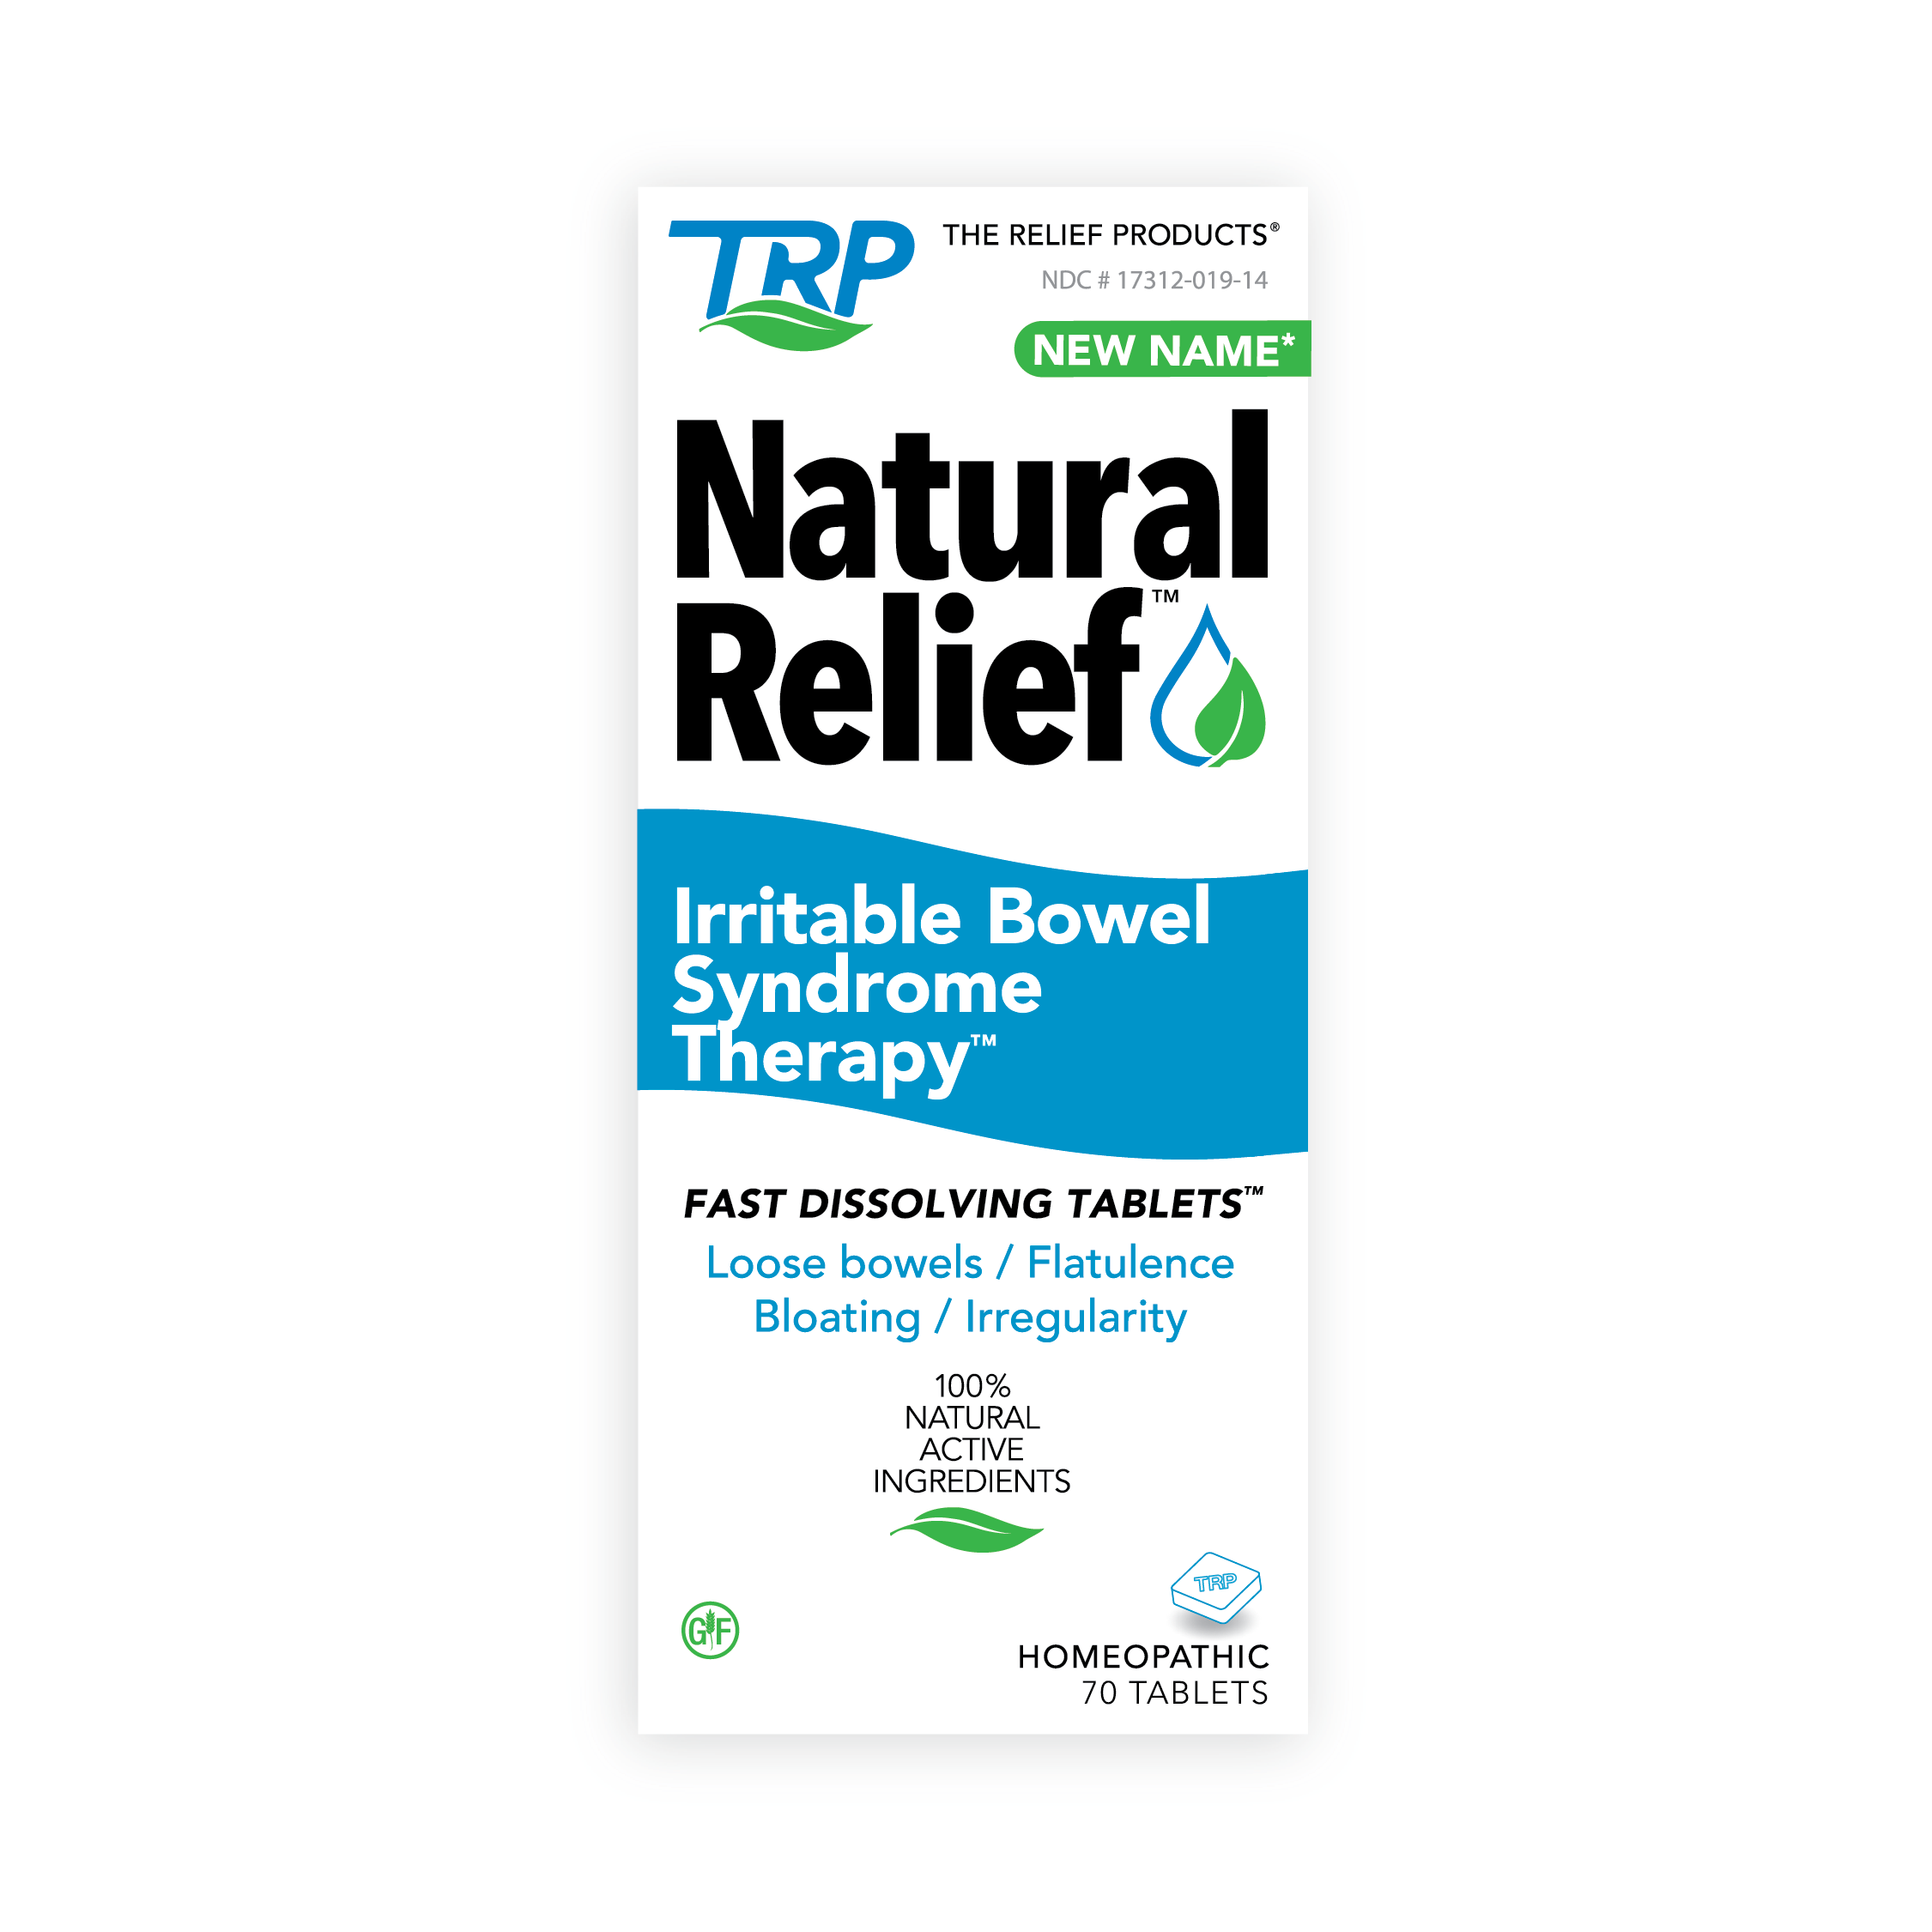 TRP Company Irritable Bowel Syndrome Therapy 70 Tablets - image 5 of 5